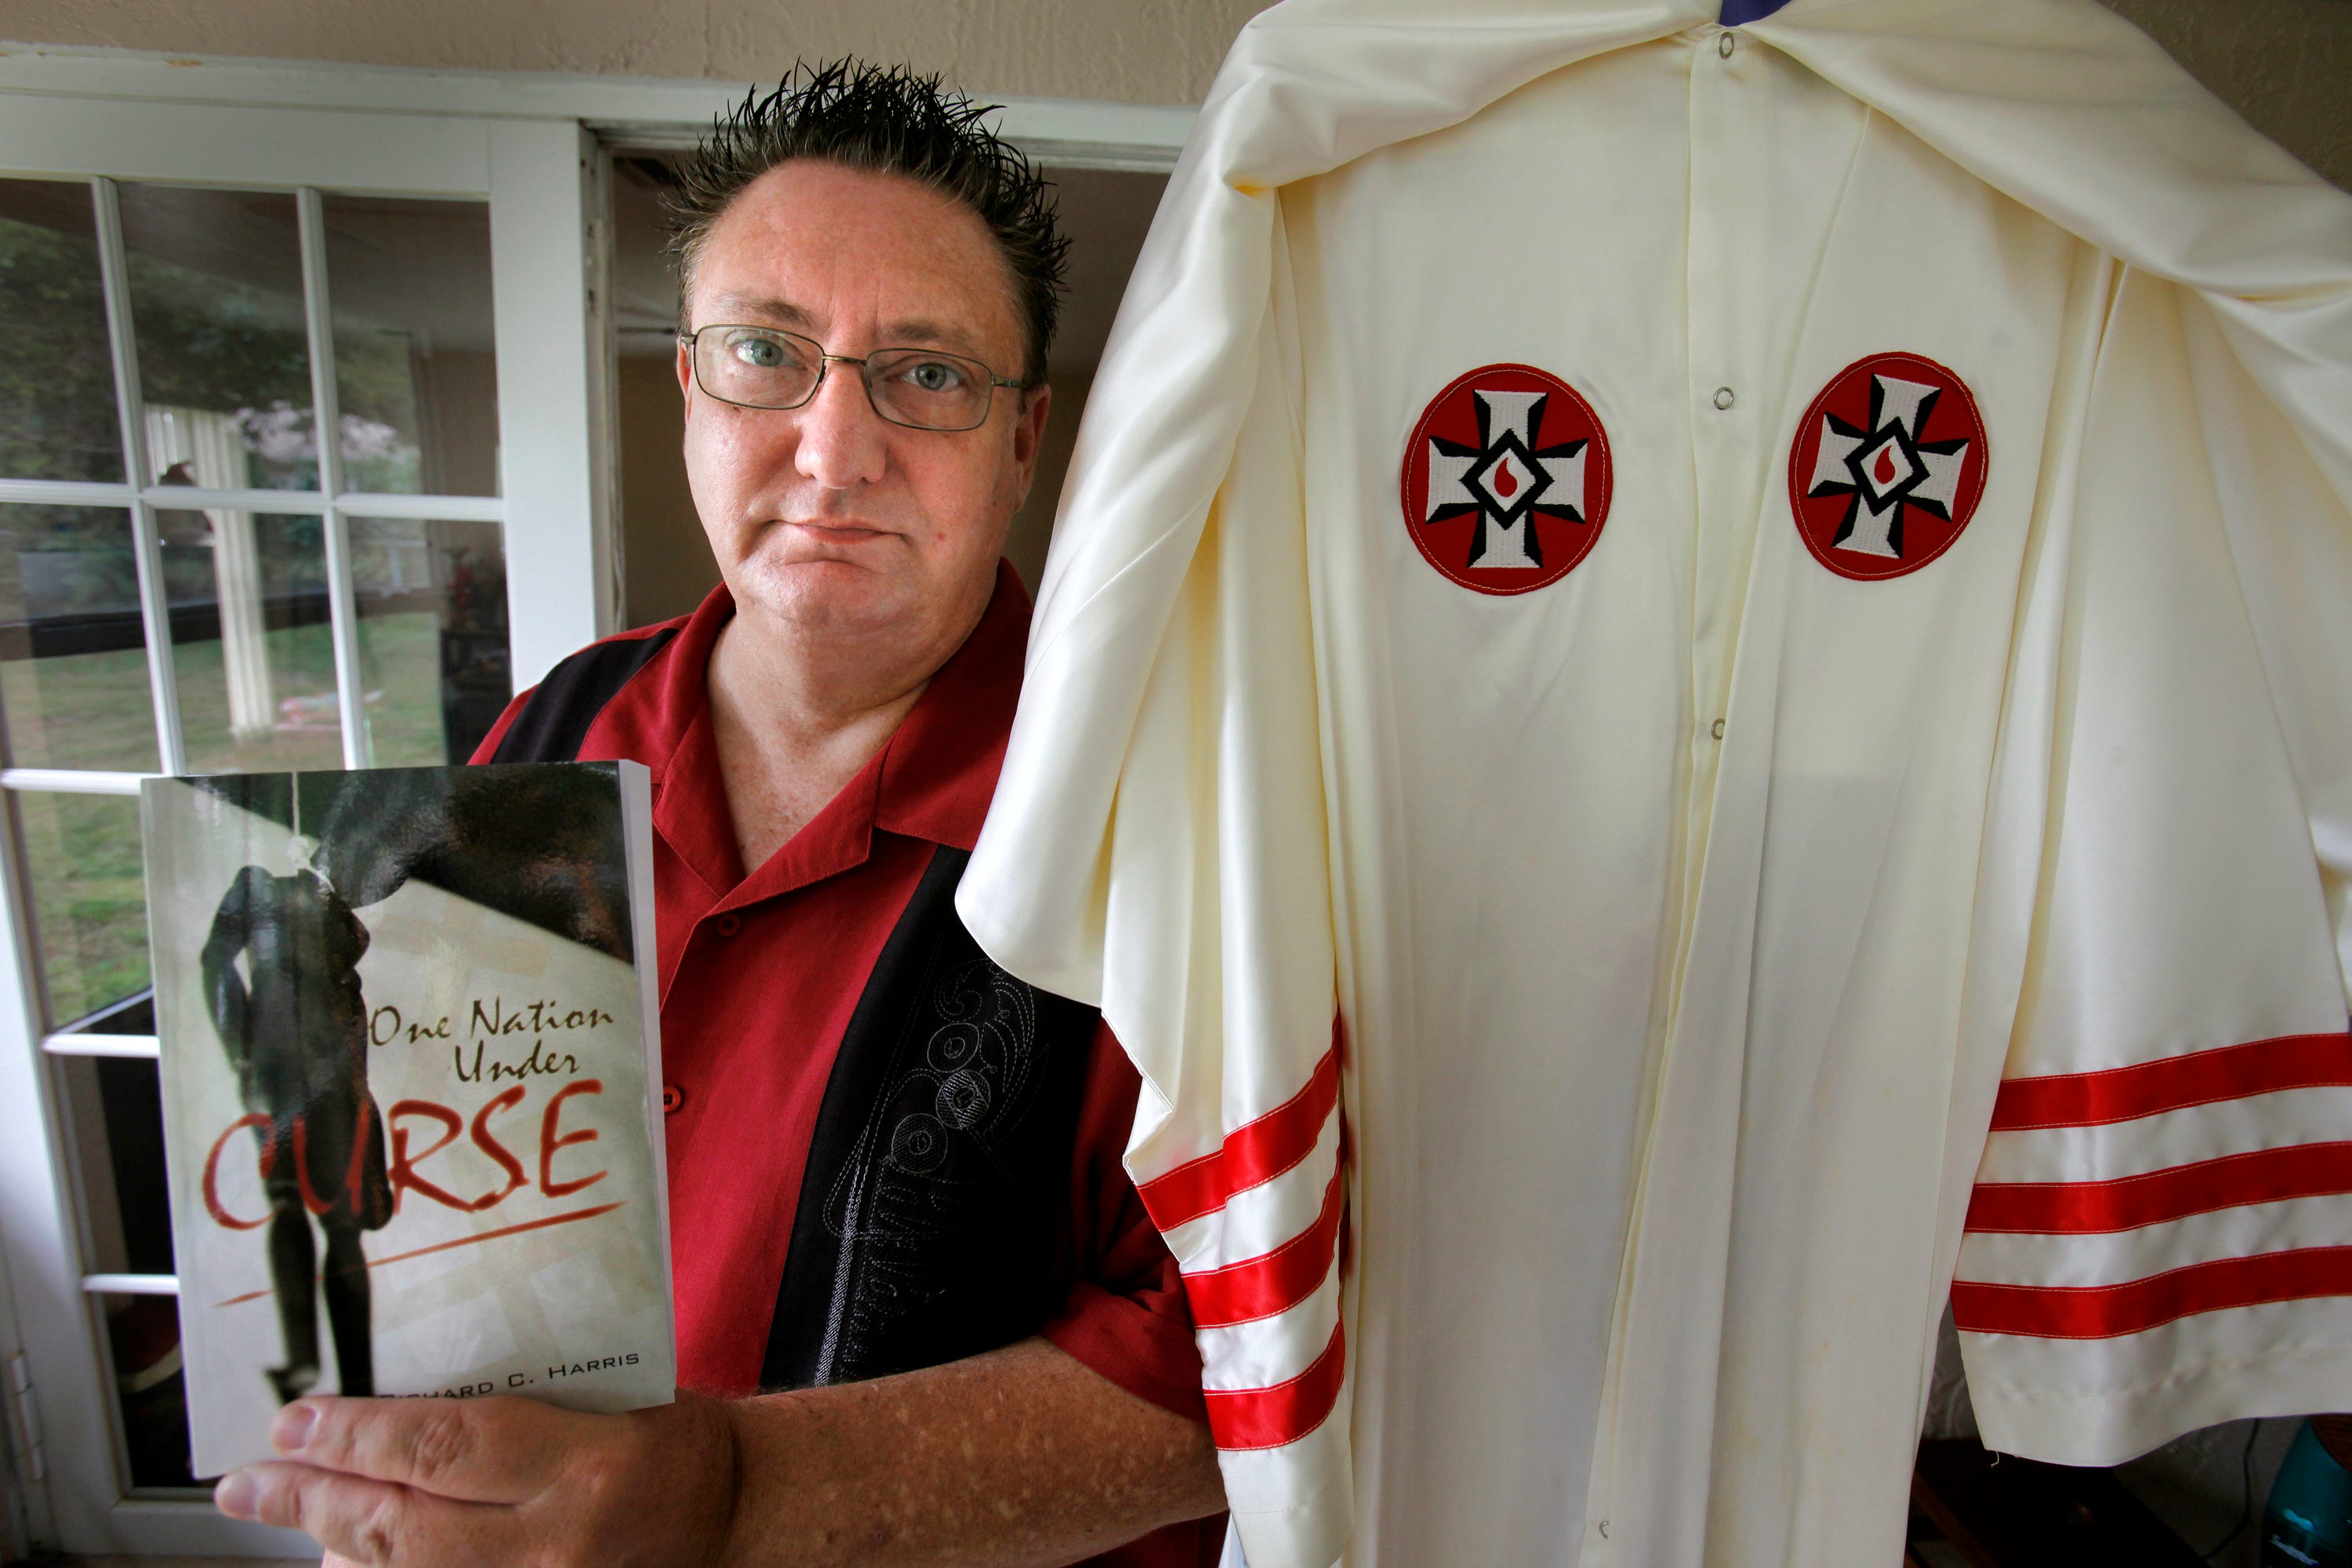 Richard Harris wrote a book about his days as a member of the KKK in Indiana and how he was called to his religious faith, "One Nation Under Curse." Pictured is one of his Klansman robes.